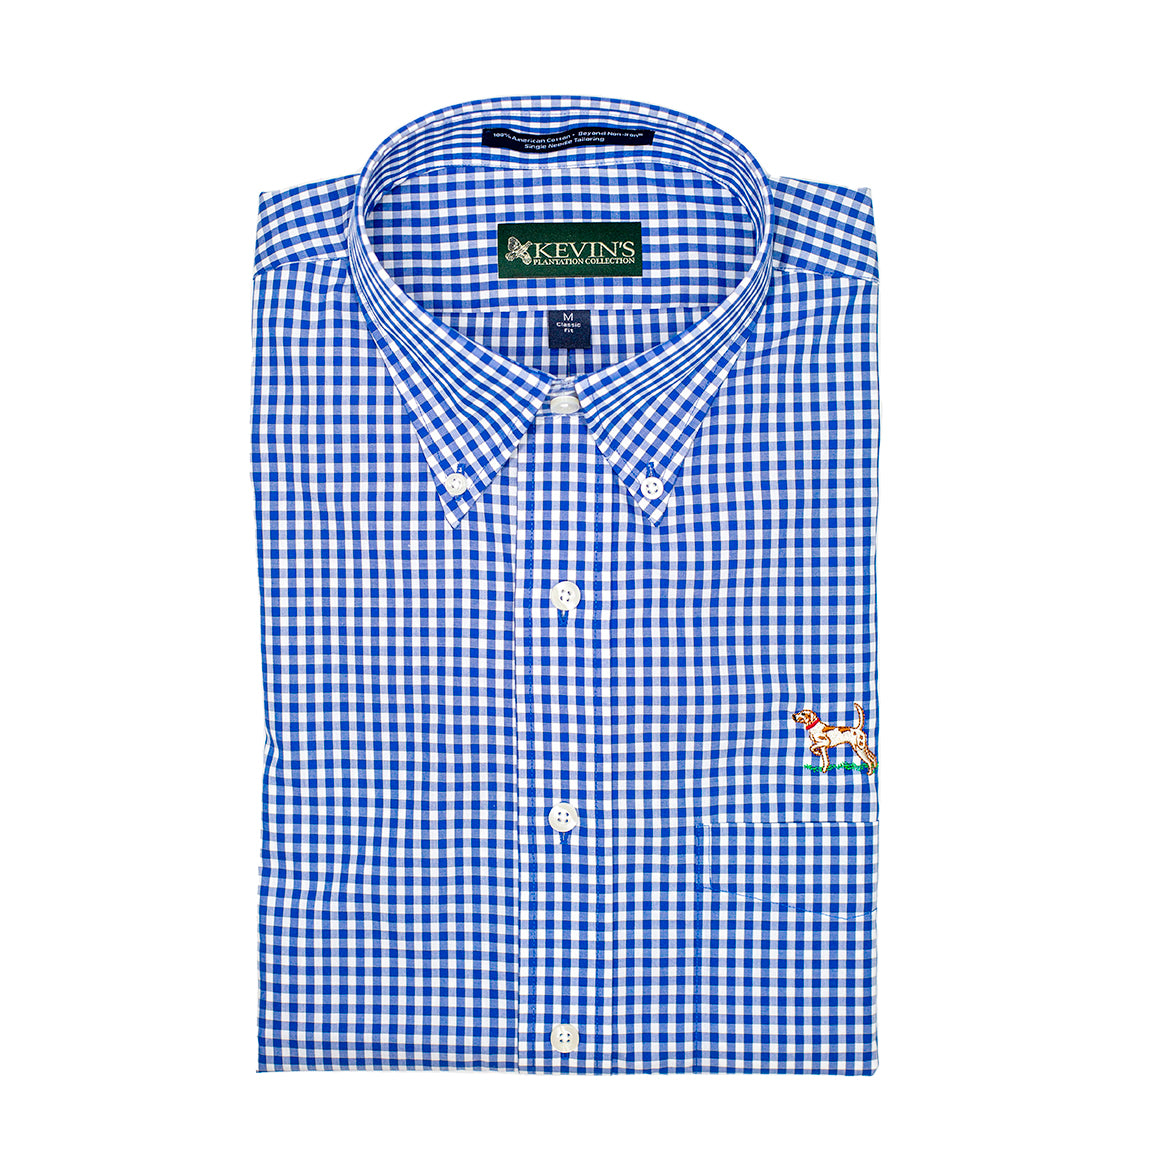 Kevin's Hector Gingham Pointer Wrinkle Free Shirt-Men's Clothing-Kevin's Fine Outdoor Gear & Apparel